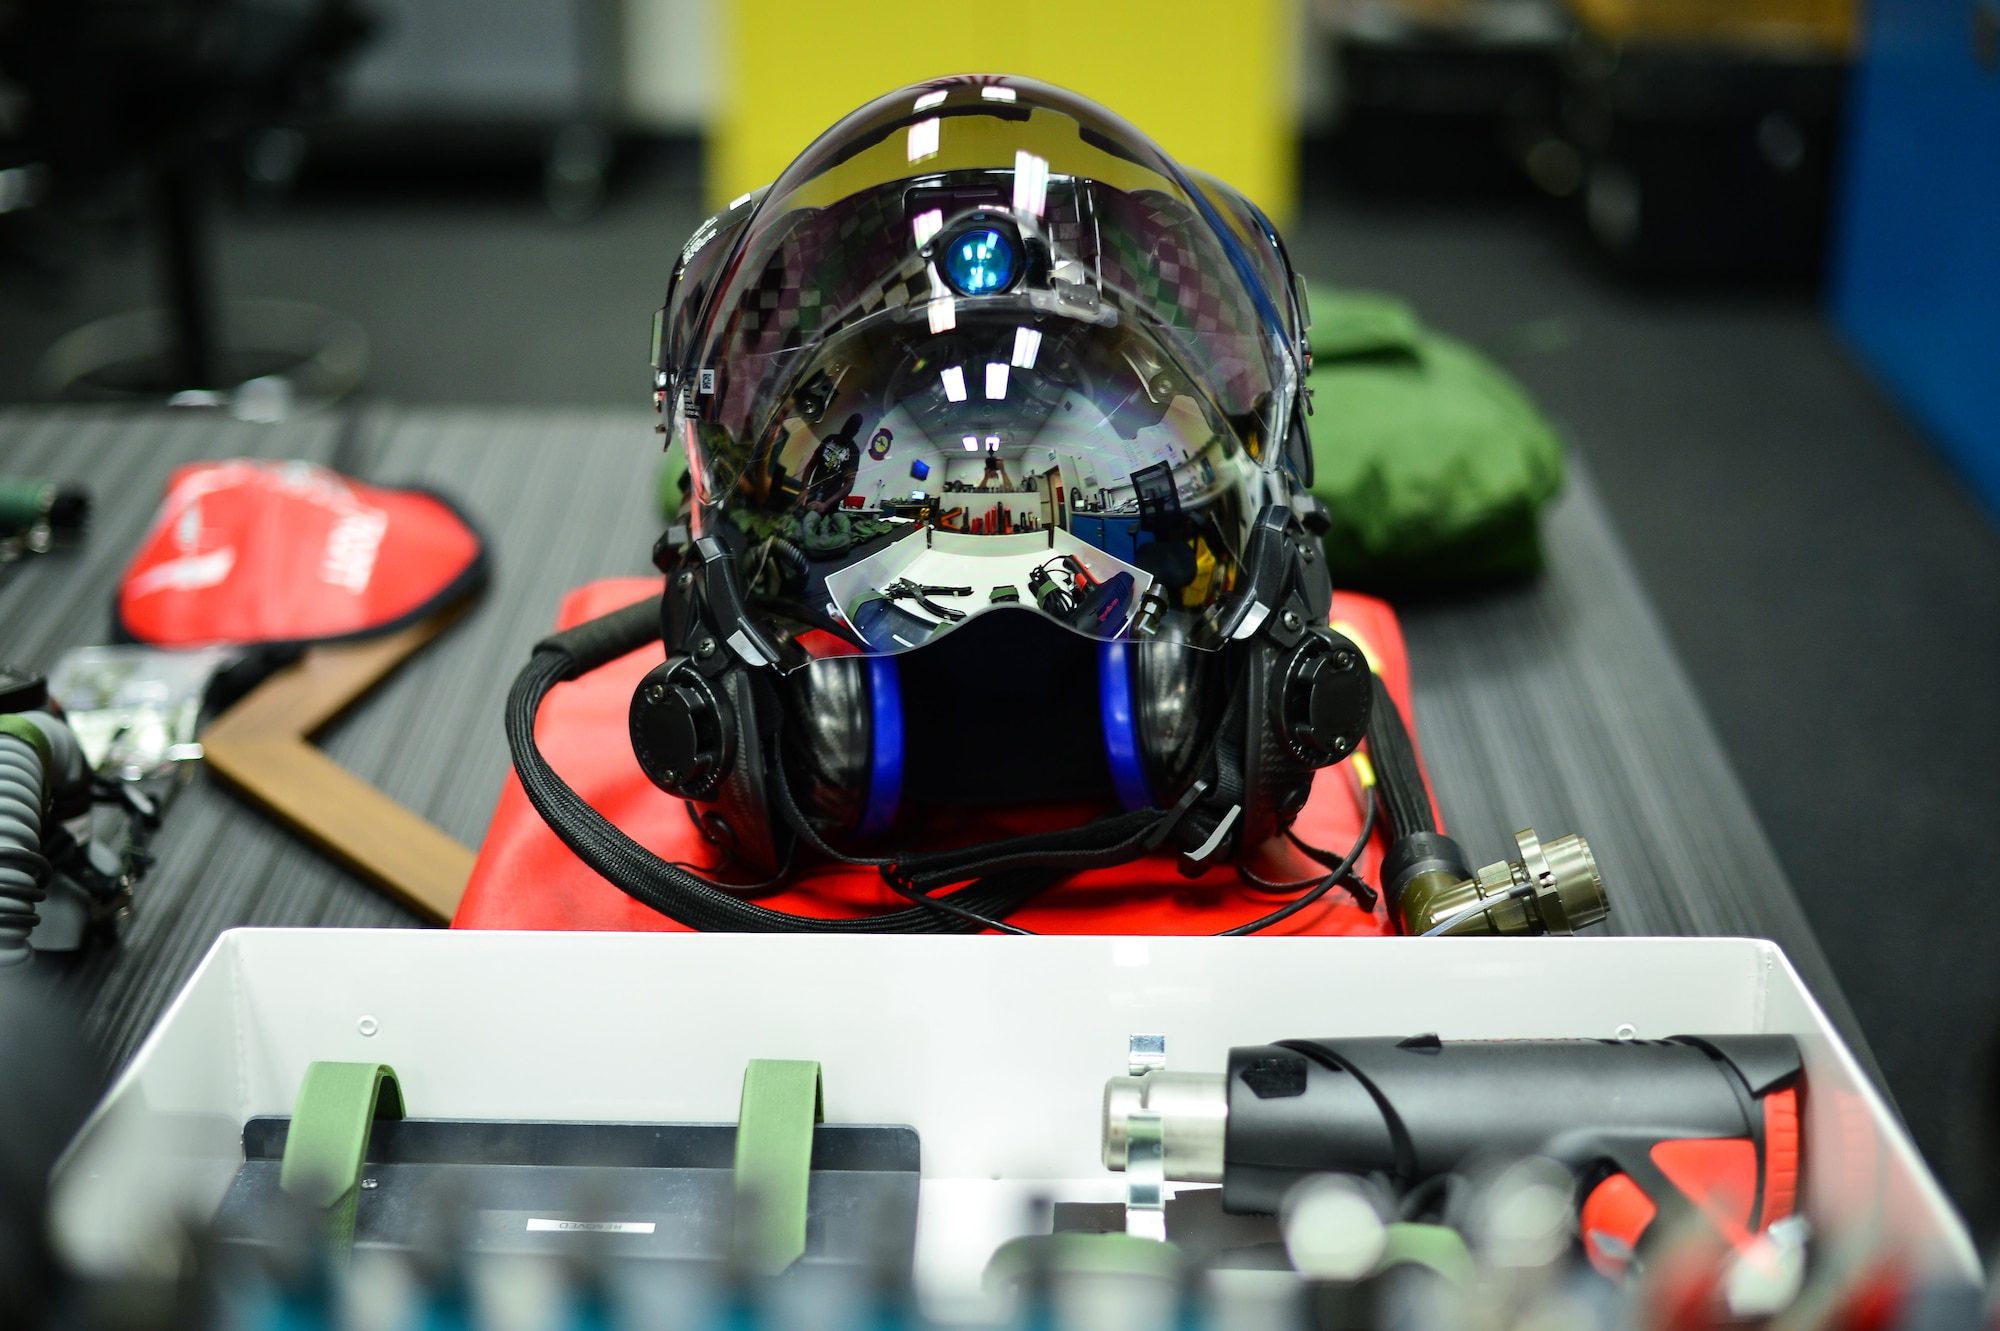 The Gen III F-35 helmet is a significant leap in technology from its F-16 predecessor and includes six external cameras, built-in night vision, and more balanced weight distribution. (U.S. Air Force photo/R. Nial Bradshaw)